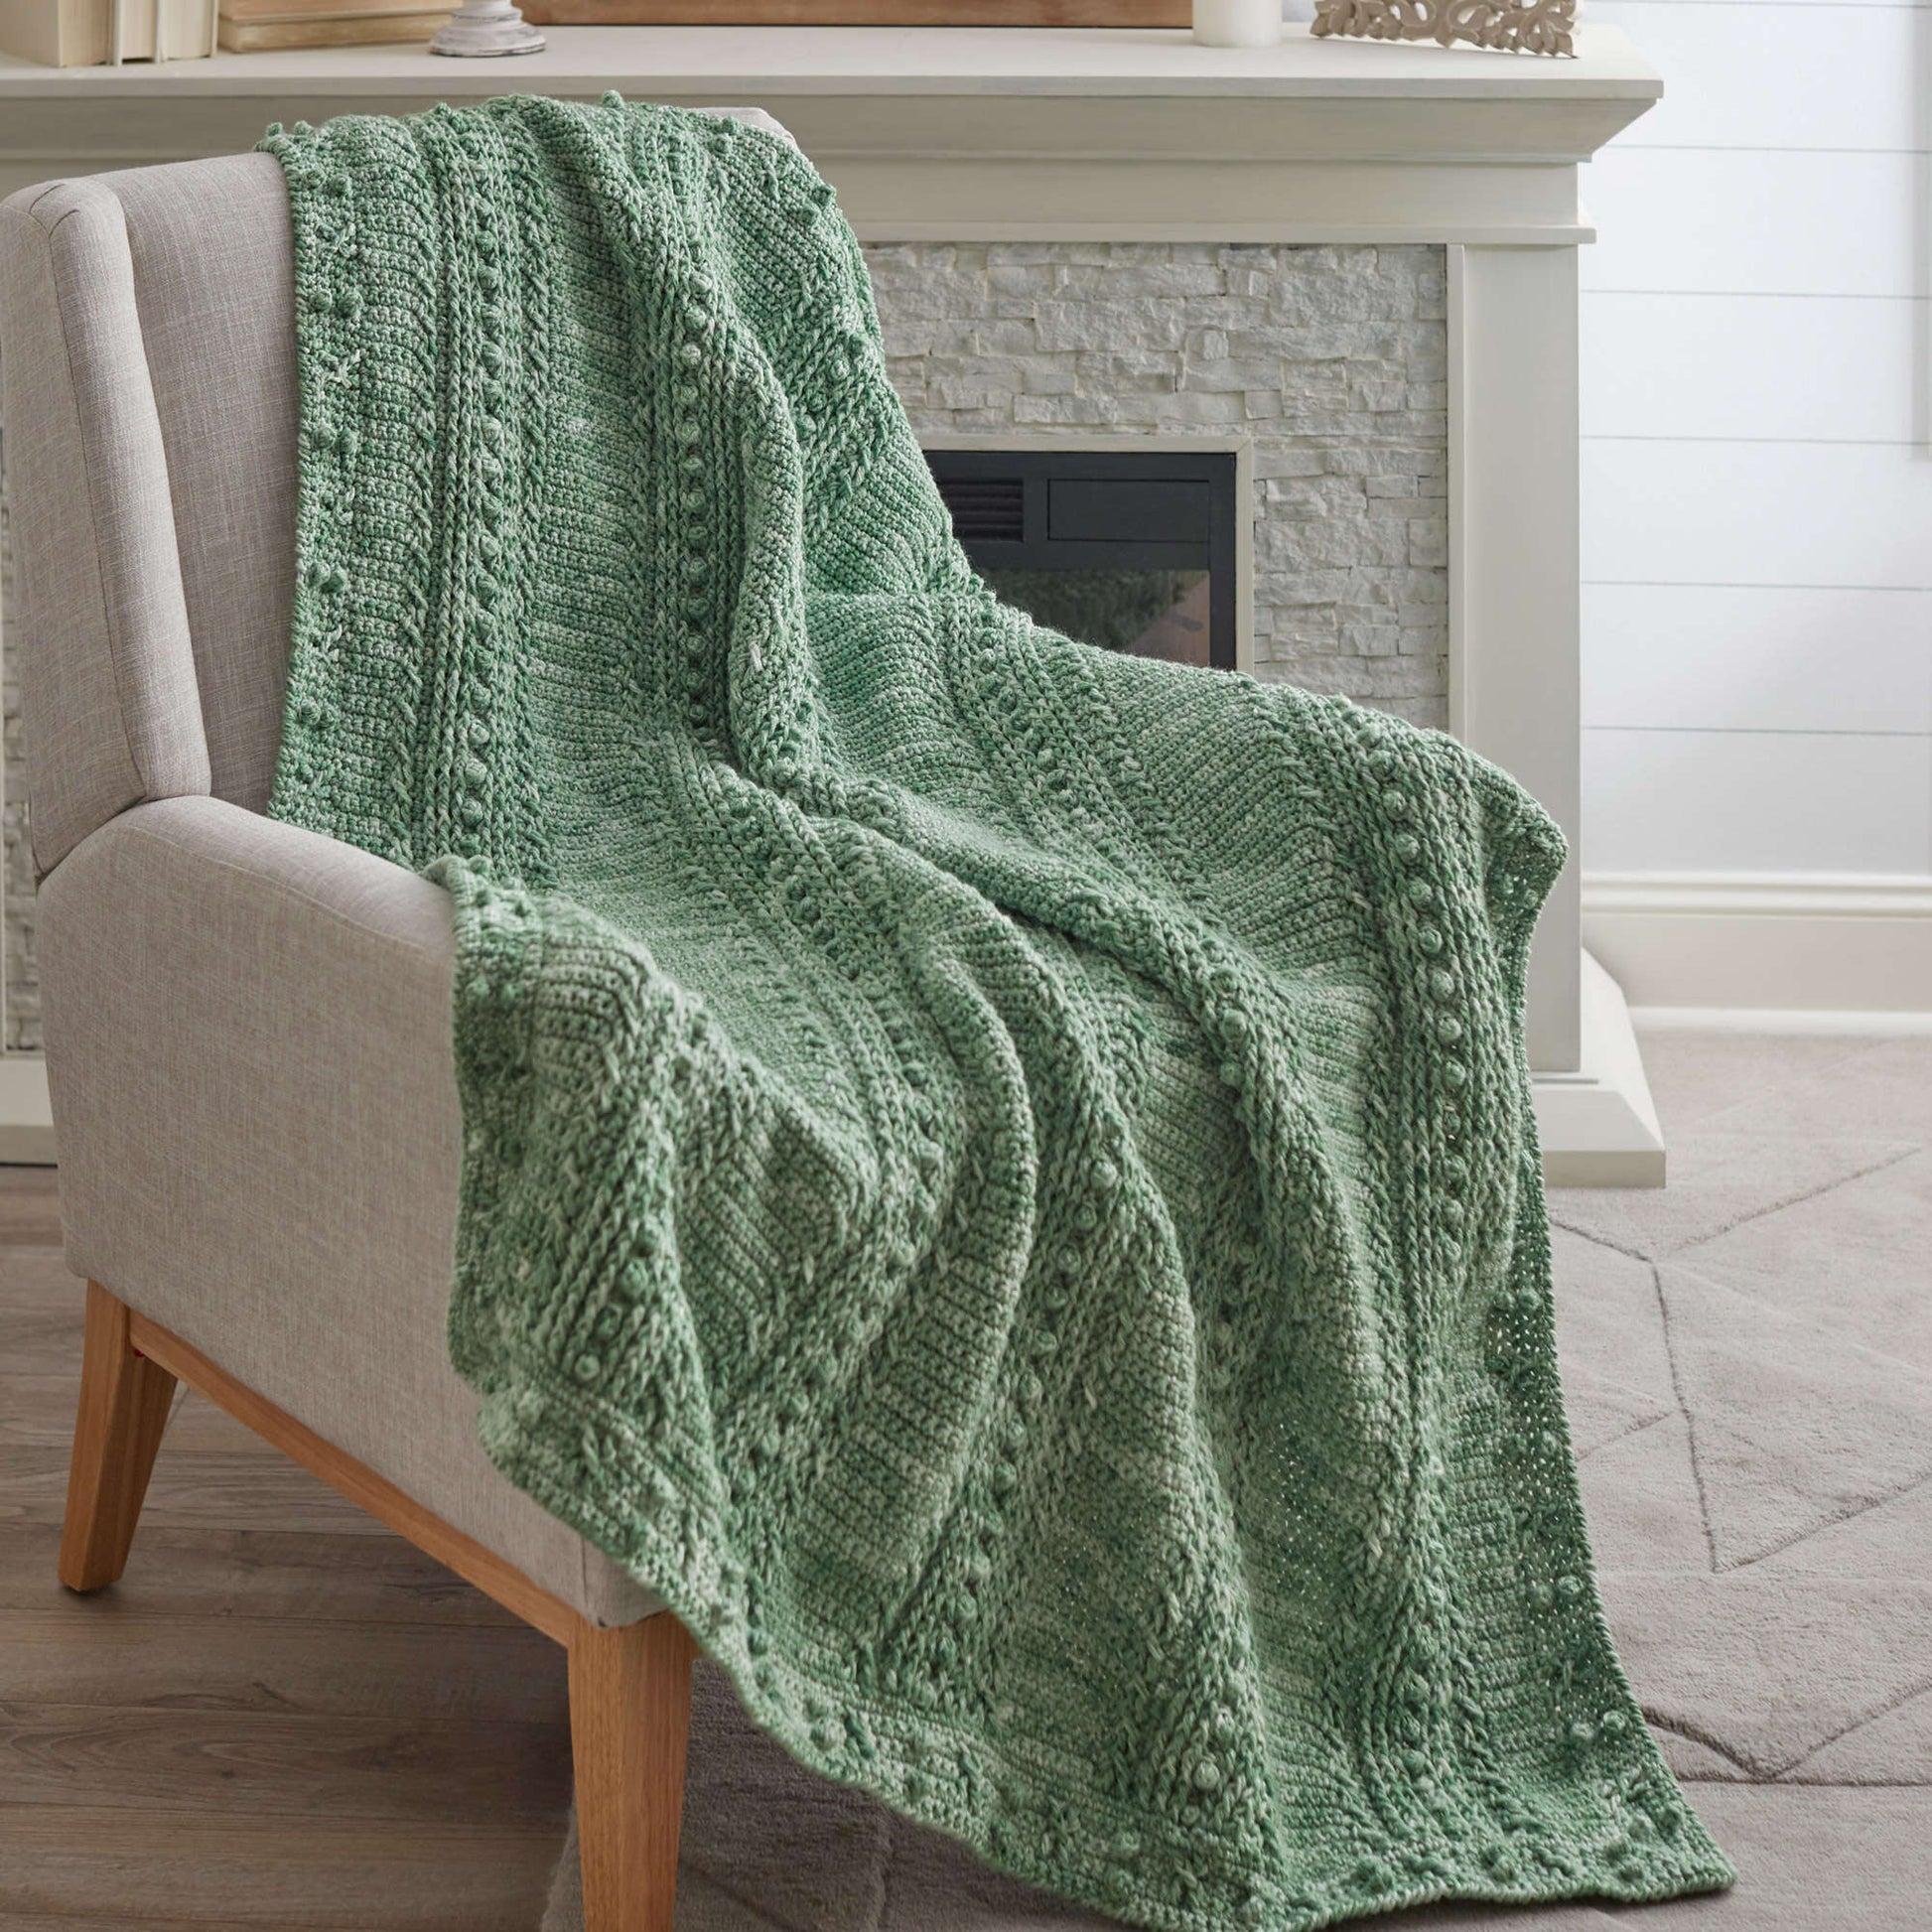 Free Red Heart Crochet Comforting One-Color Throw Pattern